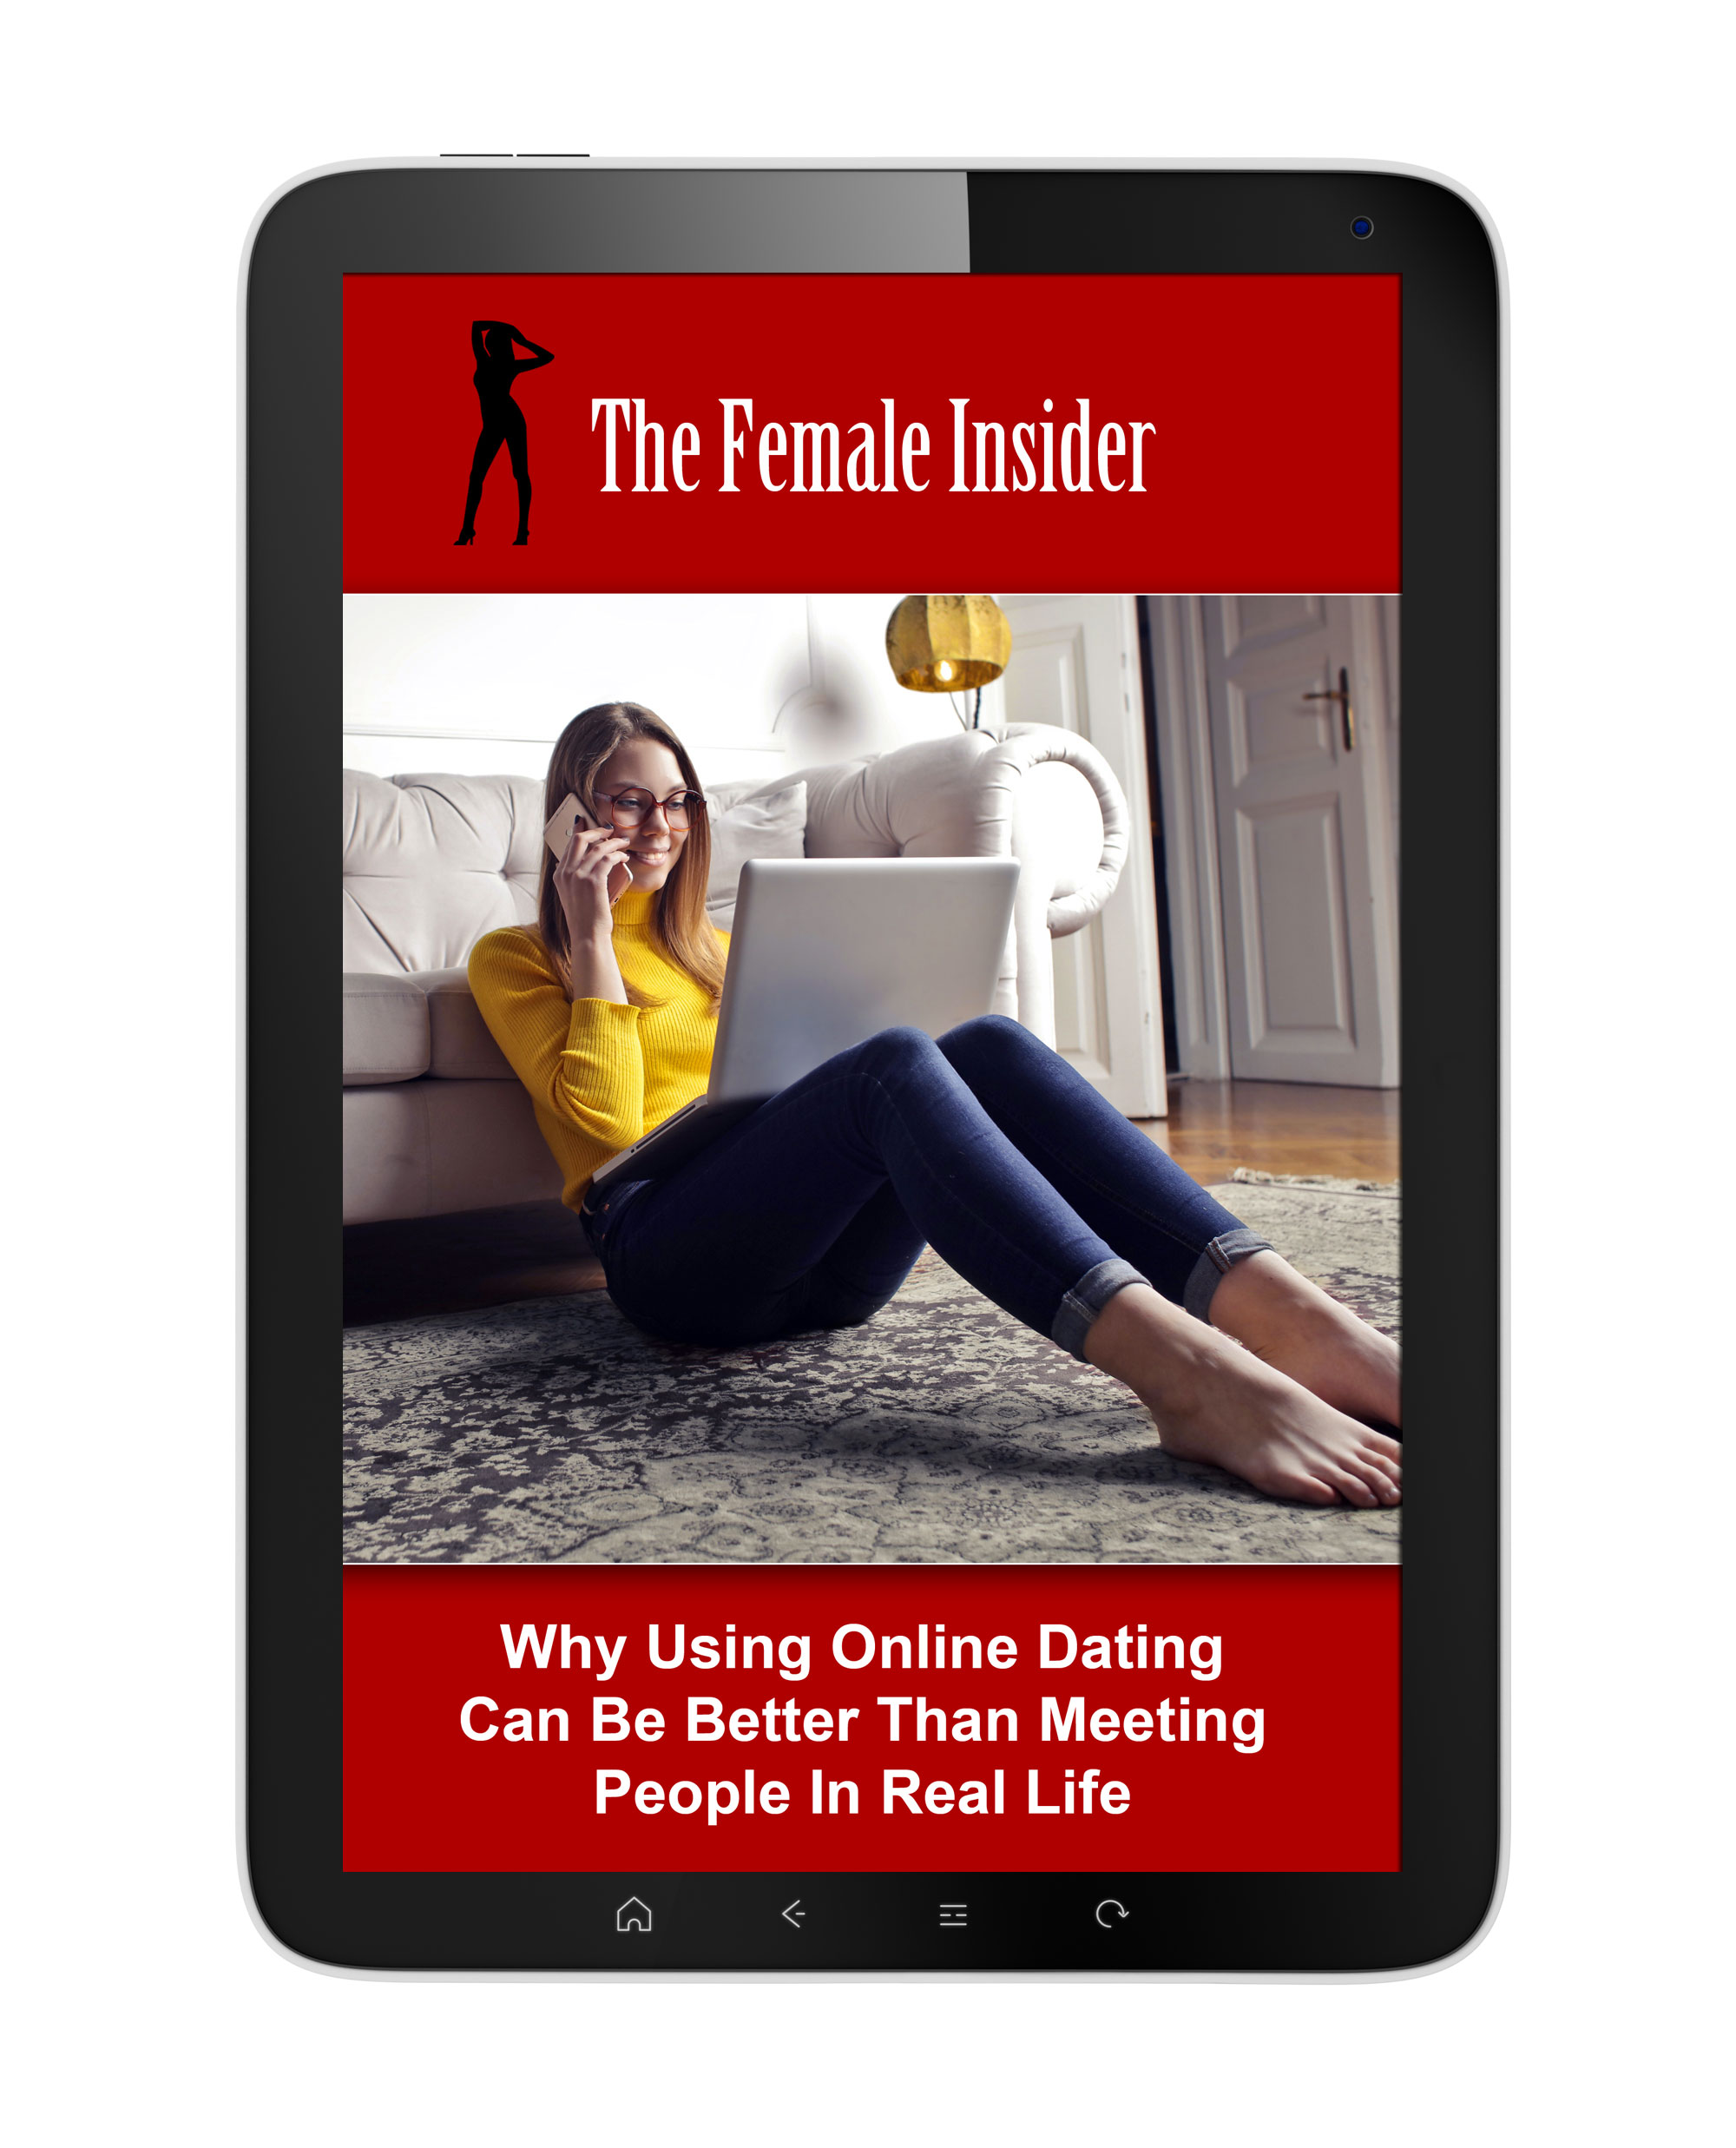 Why Using Online Dating Can Be Better Than Meeting People In Real Life